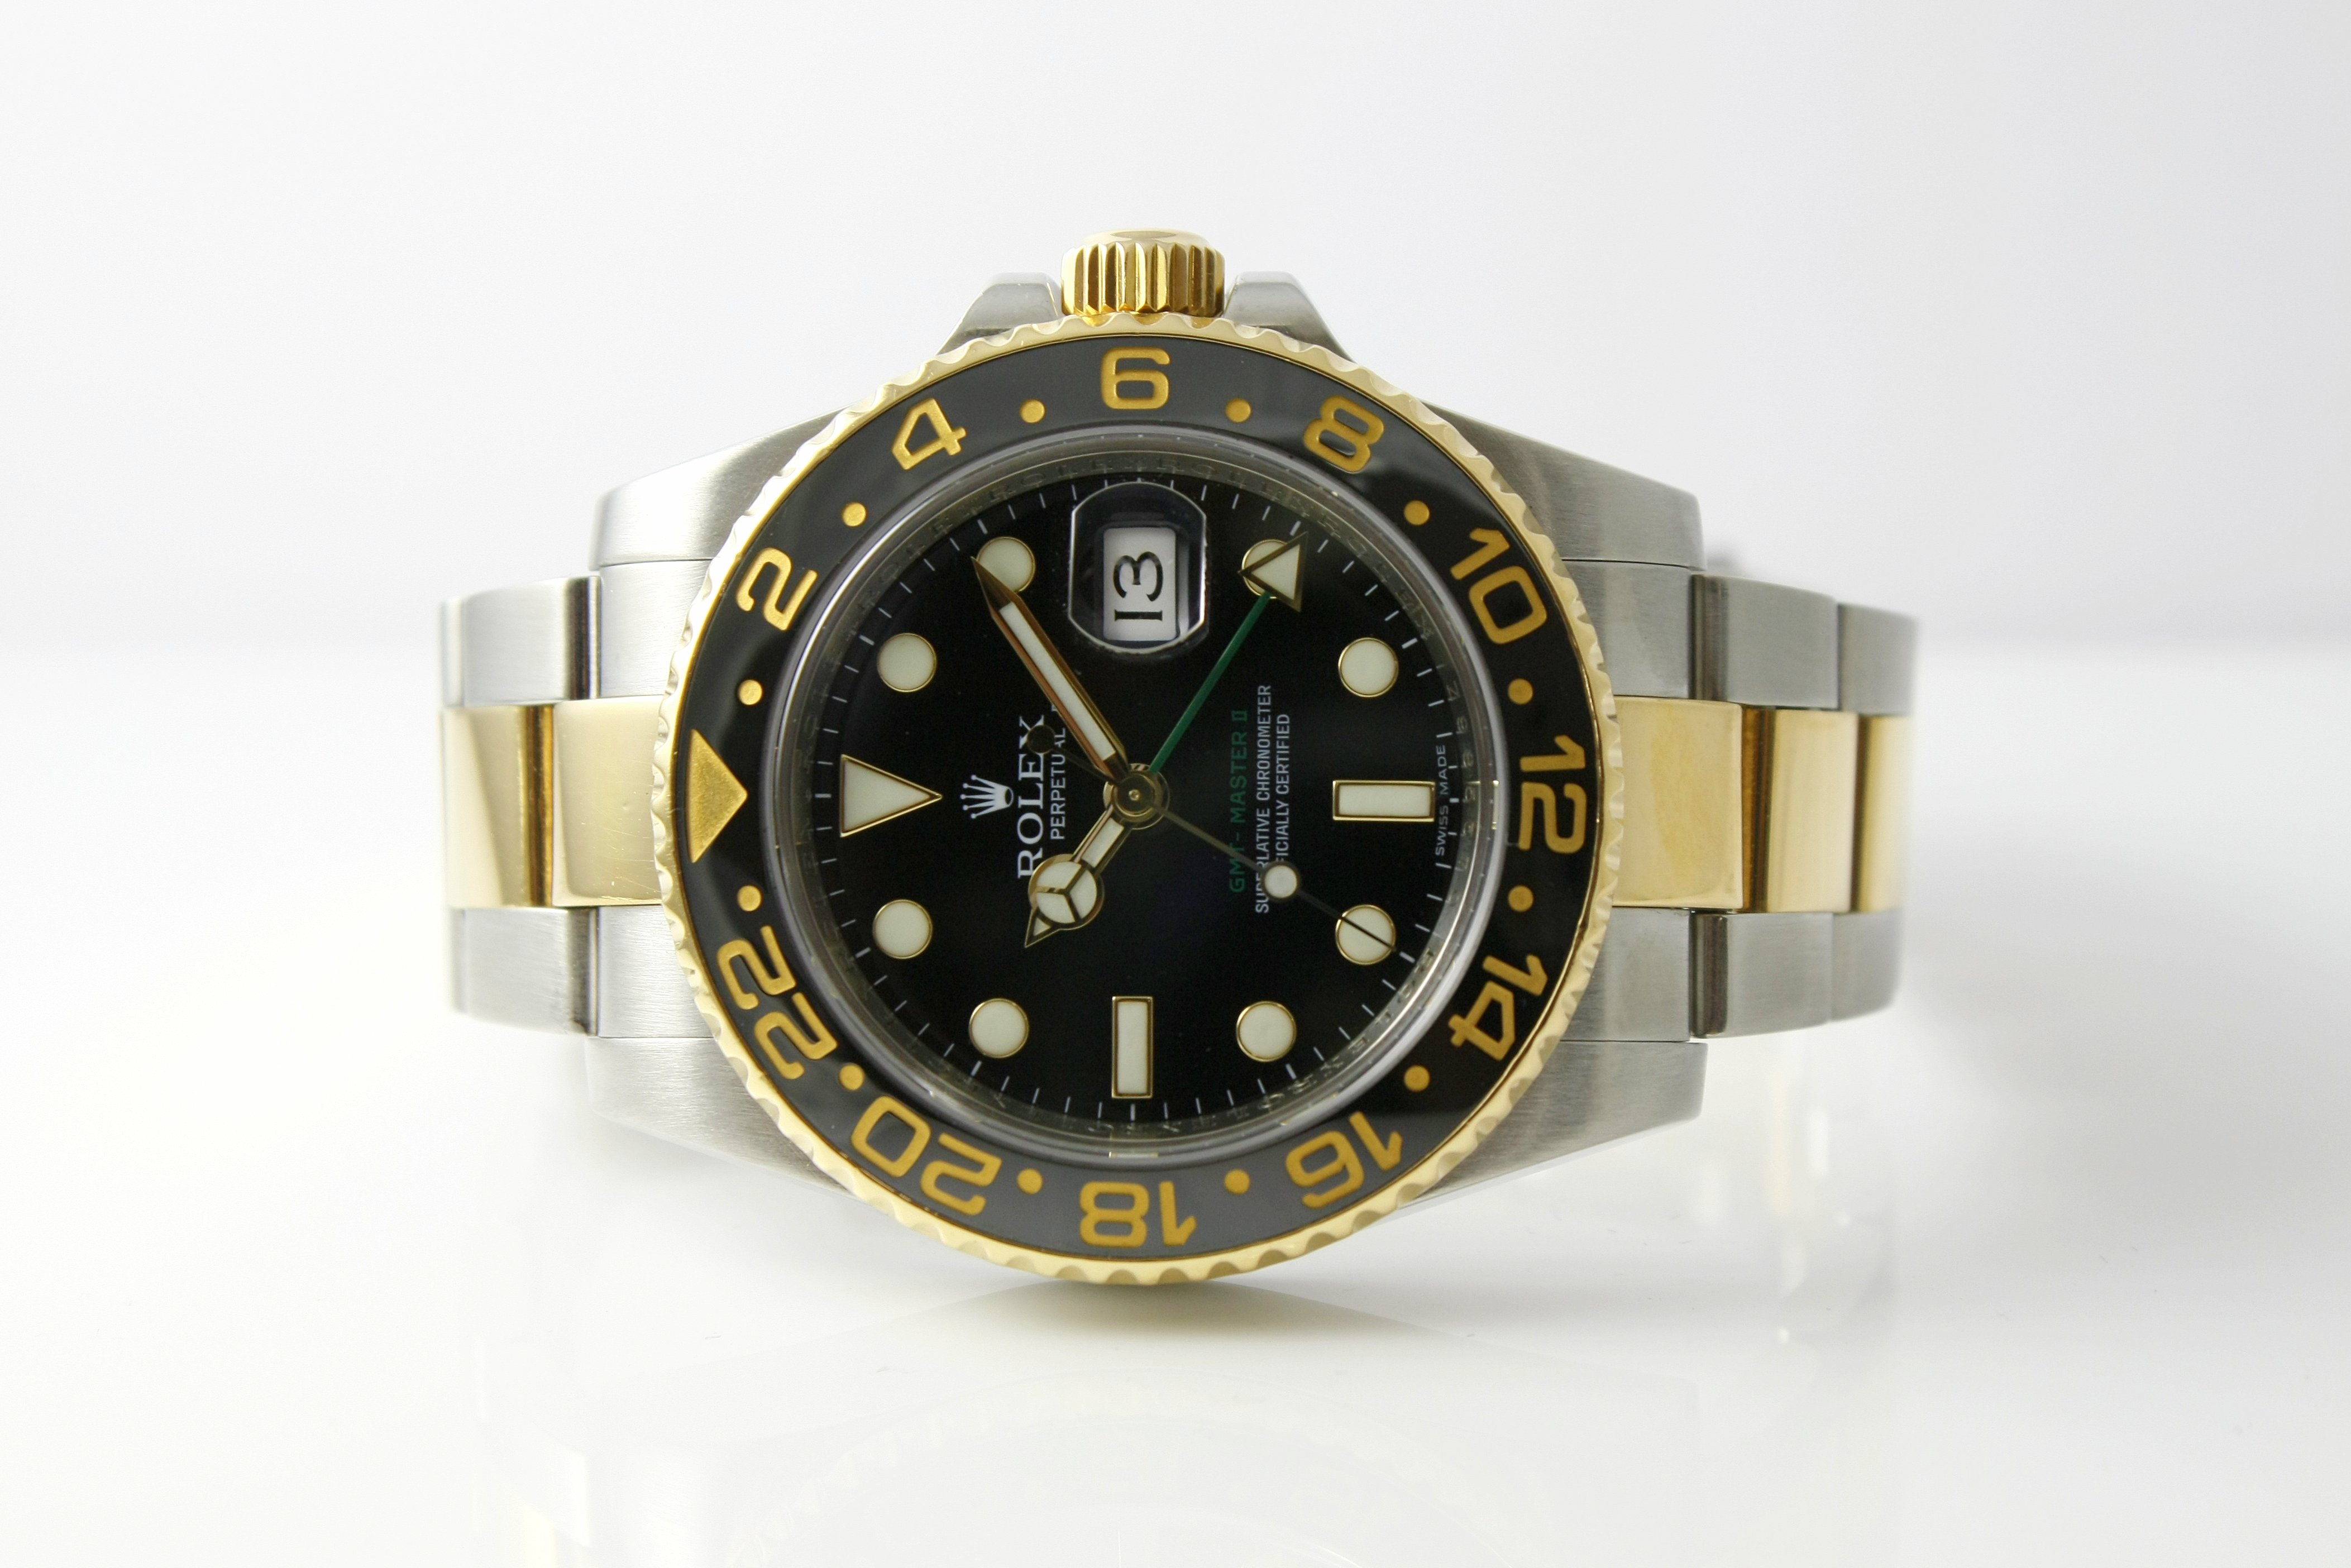 Rolex GMT-Master II Two Tone - $10,000